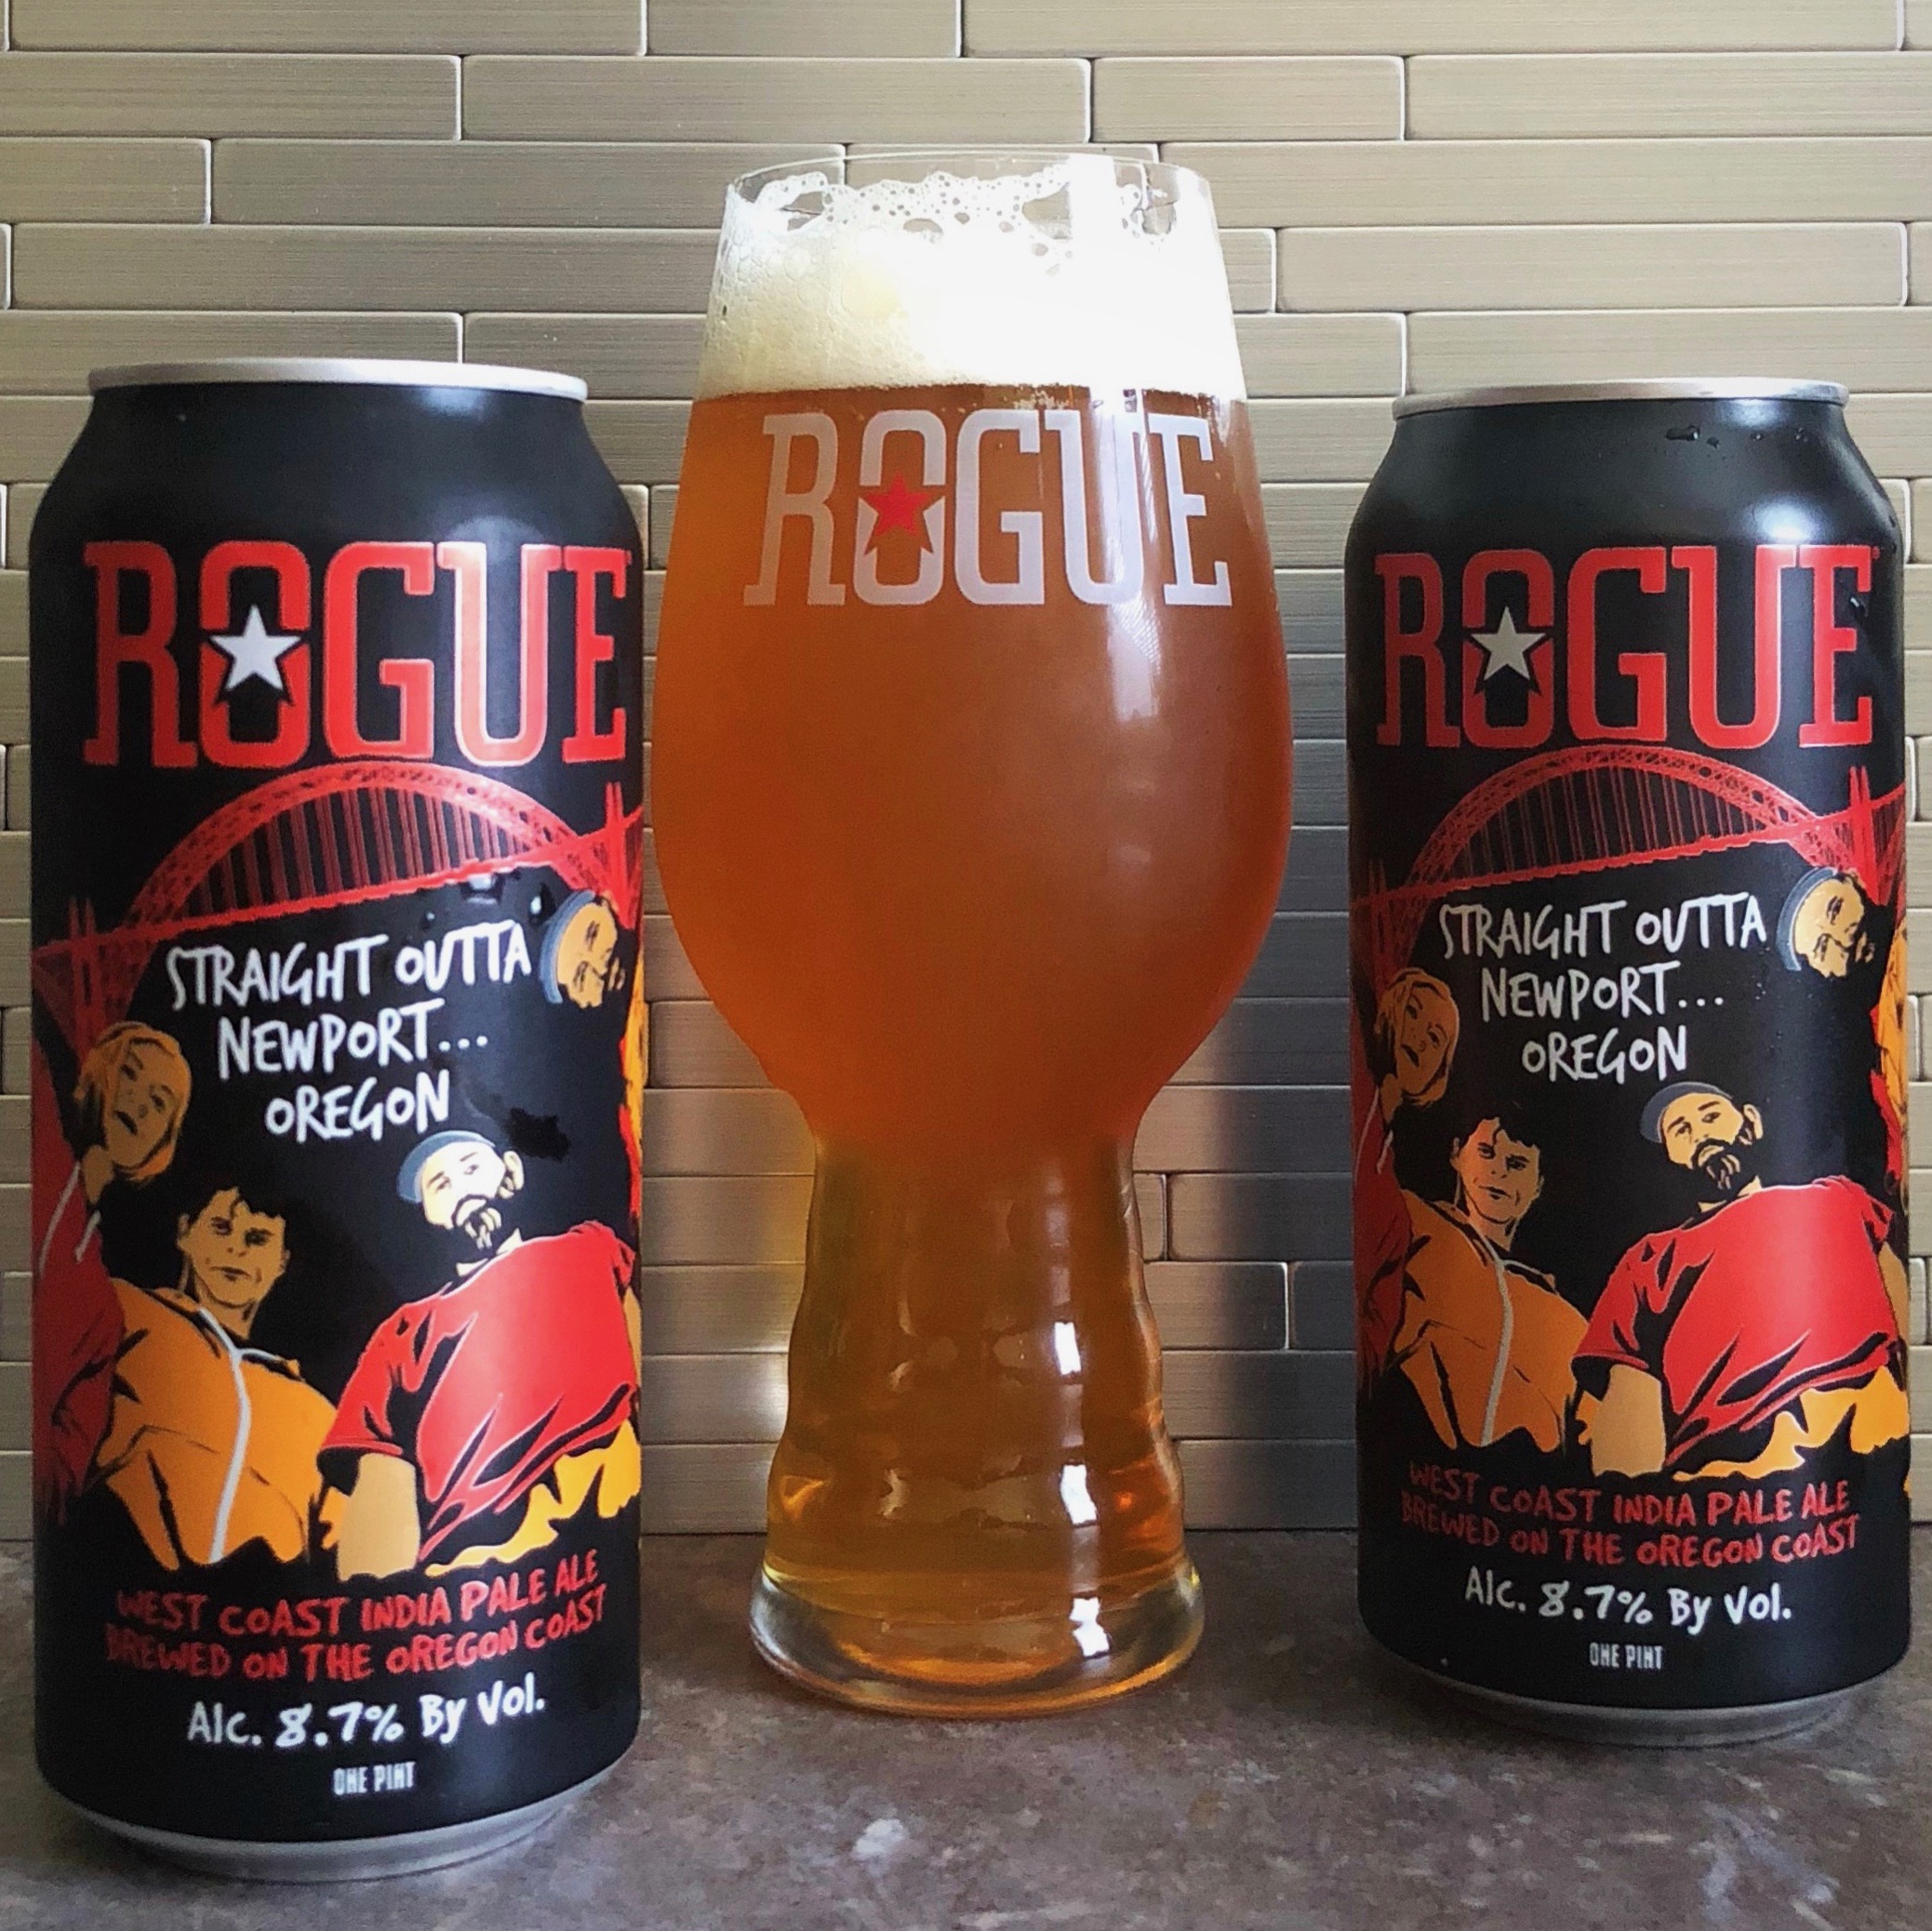 Rogue Ales releases Straight Outta Newport...Oregon in 16 ounce Tall Boy cans.